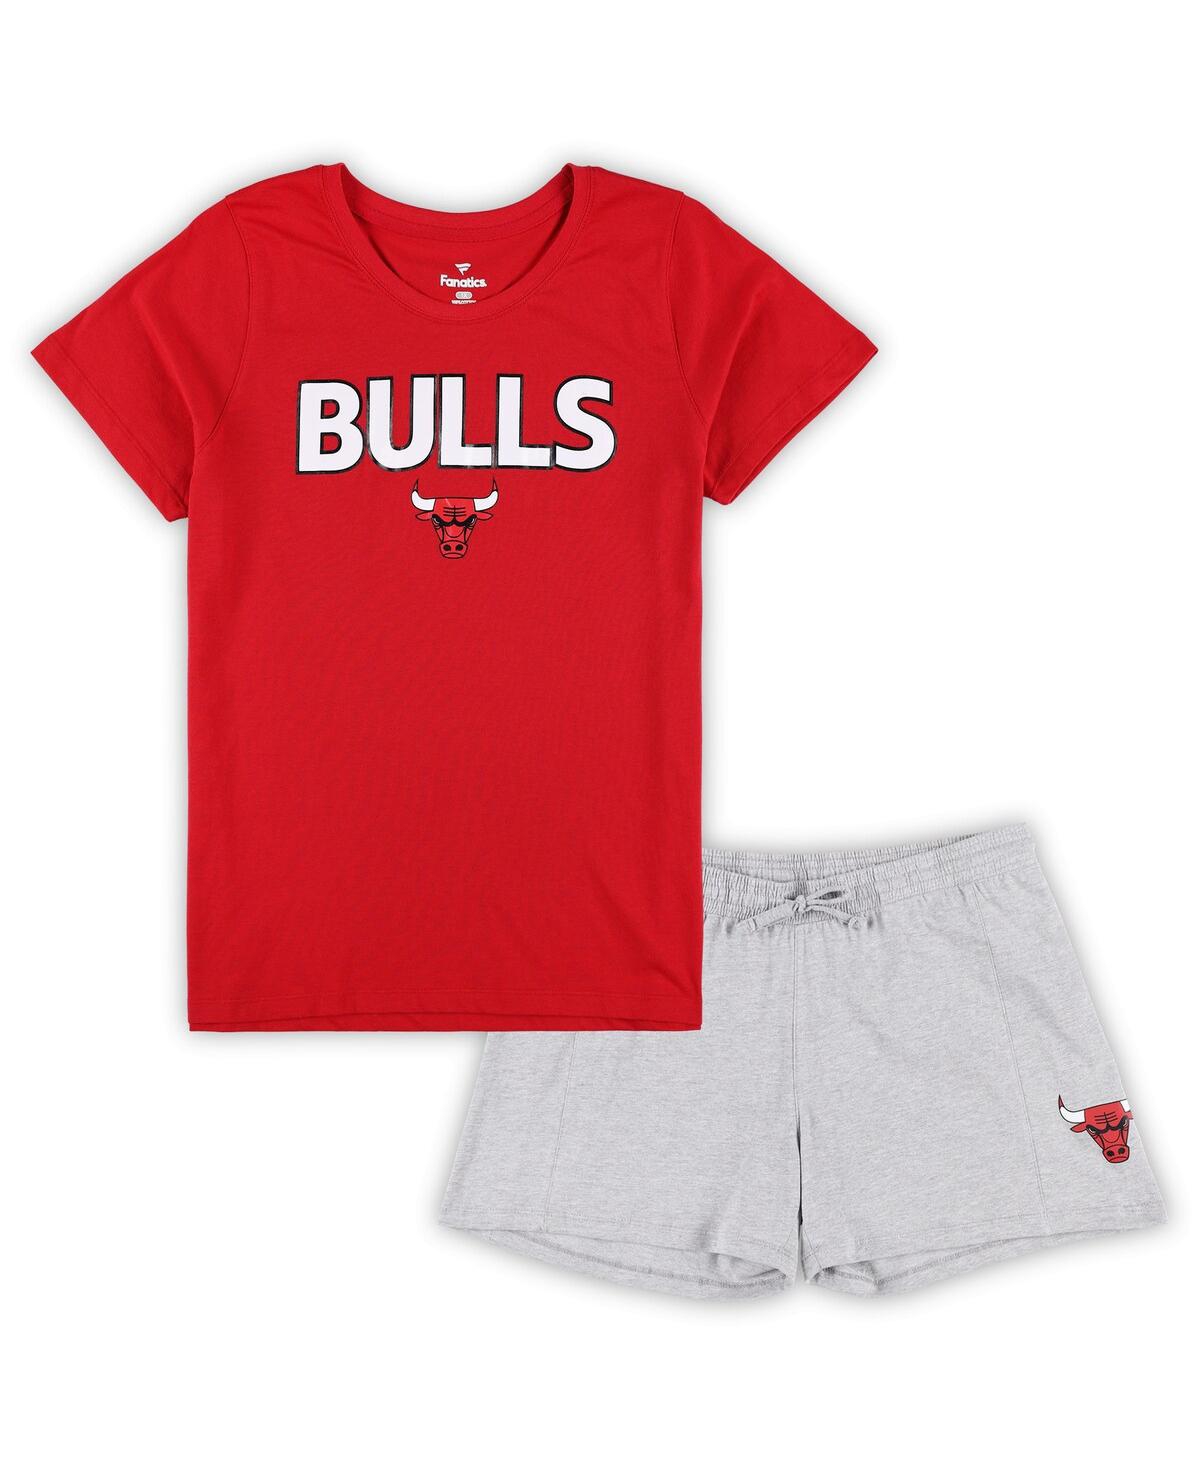 Women's Fanatics Red, Heather Gray Chicago Bulls Plus Size T-shirt and Shorts Combo Set - Red, Heather Gray